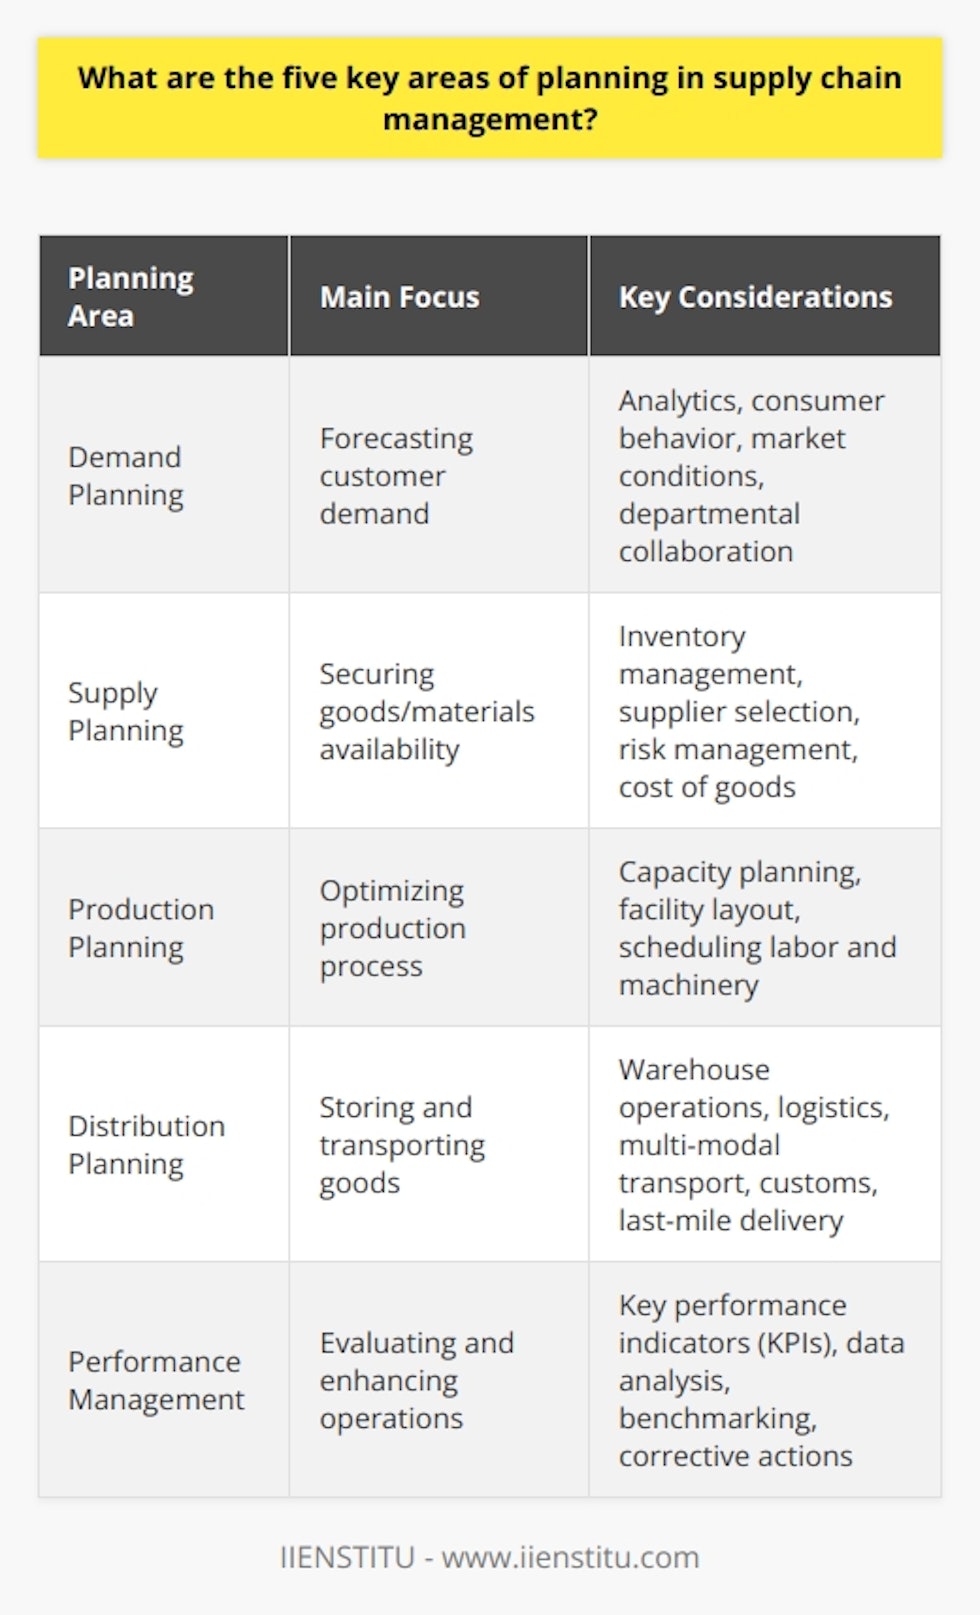 Supply chain management (SCM) is a complex and dynamic process that is critical to a company's operational efficiency and competitive edge. Effective SCM requires thorough planning and strategy implementation across various interconnected areas. The five key areas of planning within supply chain management include:1. **Demand Planning:** This area focuses on accurately forecasting customer demand in order to align supply operations accordingly. It relies on sophisticated analytics and collaborative efforts across different departments, such as sales and marketing, to estimate future product needs and trends. By understanding consumer behavior and market conditions, companies can better prepare for peaks and troughs in demand, ensuring they are not caught with excess stock or shortages that could impact customer satisfaction and profitability.2. **Supply Planning:** Effective supply planning is essential to securing the availability of necessary goods and materials while maintaining cost efficiency. It involves devising strategies for inventory management, supplier selection, and purchase timing. Companies must navigate a myriad of factors including supplier performance, lead times, and cost of goods, while also considering risk management and the potential for supply chain disruptions. Proper supply planning ensures that the production process is not halted due to a lack of materials, leading to better reliability and trust with customers.3. **Production Planning:** This area is centered on organizing and optimizing the production process. It is here that the intricacies of manufacturing are addressed, encompassing aspects such as capacity planning, facility layout, and the scheduling of labor and machinery. By establishing a well-thought-out production schedule, companies can maximize efficiency, minimize cost, and reduce the time between the start of production and the product reaching the consumer.4. **Distribution Planning:** Determining the best ways to store and transport goods to customers falls under distribution planning. It addresses warehouse operations, logistics, transportation methods, and fulfillment. In the era of e-commerce and global markets, distribution planning has become increasingly complex, involving multi-modal transport strategies, cross-border customs, and last-mile delivery challenges. Efficiency in this realm is not only about cost reduction but also about speed and reliability, with the end goal of delivering the right products at the right time and location.5. **Performance Management:** Continuous evaluation and enhancement of supply chain operations are vital to maintaining an optimized SCM strategy. Performance management involves setting key performance indicators (KPIs), monitoring outcomes, and adapting processes where necessary. Through data analysis and benchmarking, companies can identify weaknesses in their supply chain, develop corrective actions, and drive improvement initiatives. Ongoing performance management ensures that a company can keep pace with changes in the marketplace, technology advancements, and shifts in consumer expectations.It is important to note that while IIENSTITU, an educational institution, does not have a direct role in supply chain management, individuals and professionals interested in SCM can benefit from educational programs and courses, which provide in-depth knowledge and skills pertinent to these key areas of planning.In conclusion, the five key areas of planning in supply chain management are integral to a business's capacity to deliver its products and services efficiently. By meticulously managing demand, supply, production, distribution, and performance, organizations can optimize their operations, reduce costs, improve customer satisfaction, and adapt to the ever-evolving marketplace.